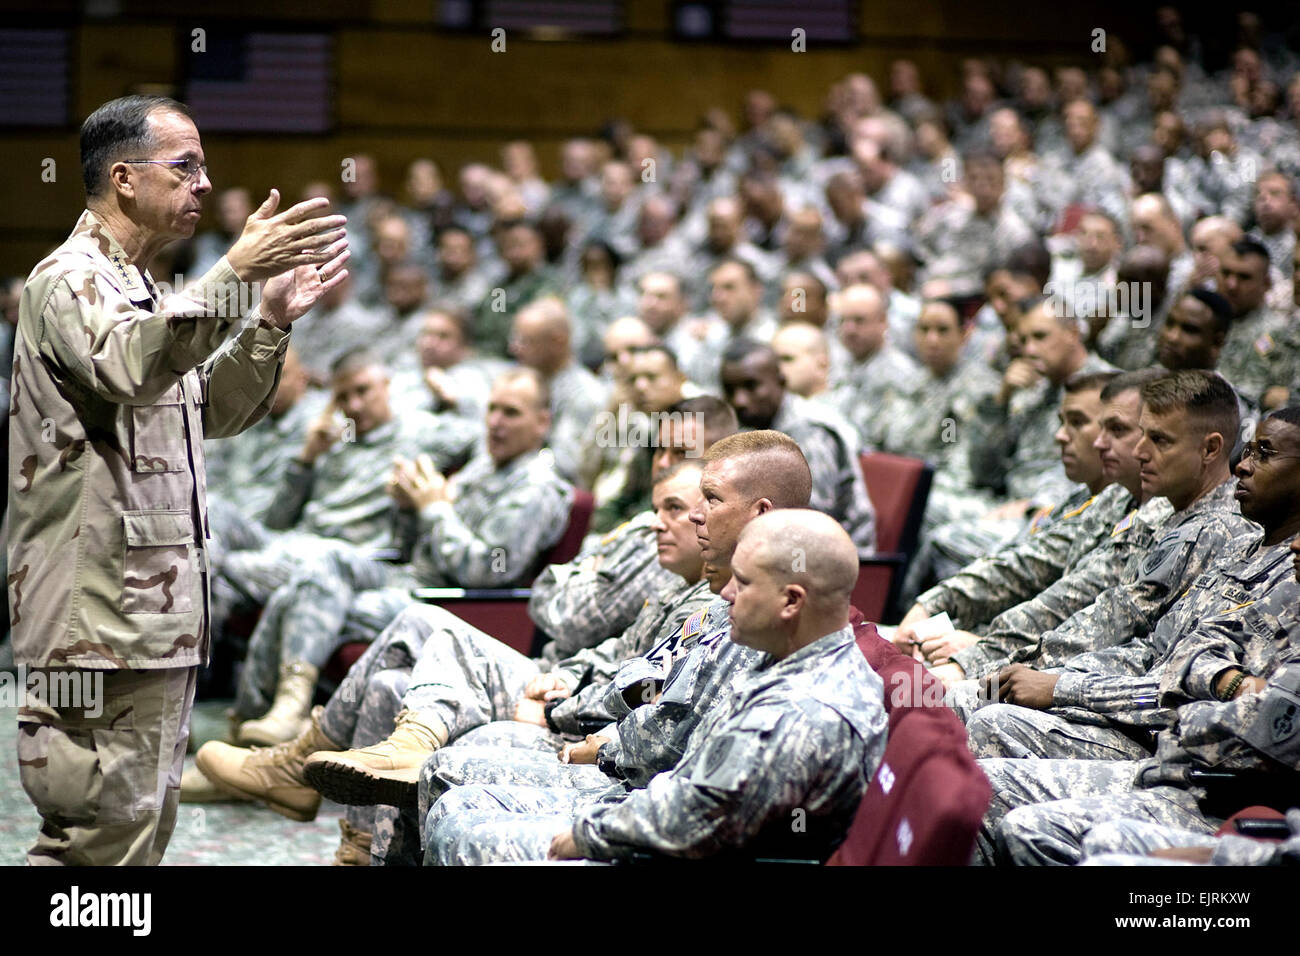 U.S Navy Adm. Mike Mullen chairman of the Joint Chiefs of Staff addresses students at the U.S. Army Sergeants Major Academy, Ft, Bliss, Tx., Sept. 18, 2007.  Mass Communication Specialist 1st Class Chad J. McNeeley Stock Photo